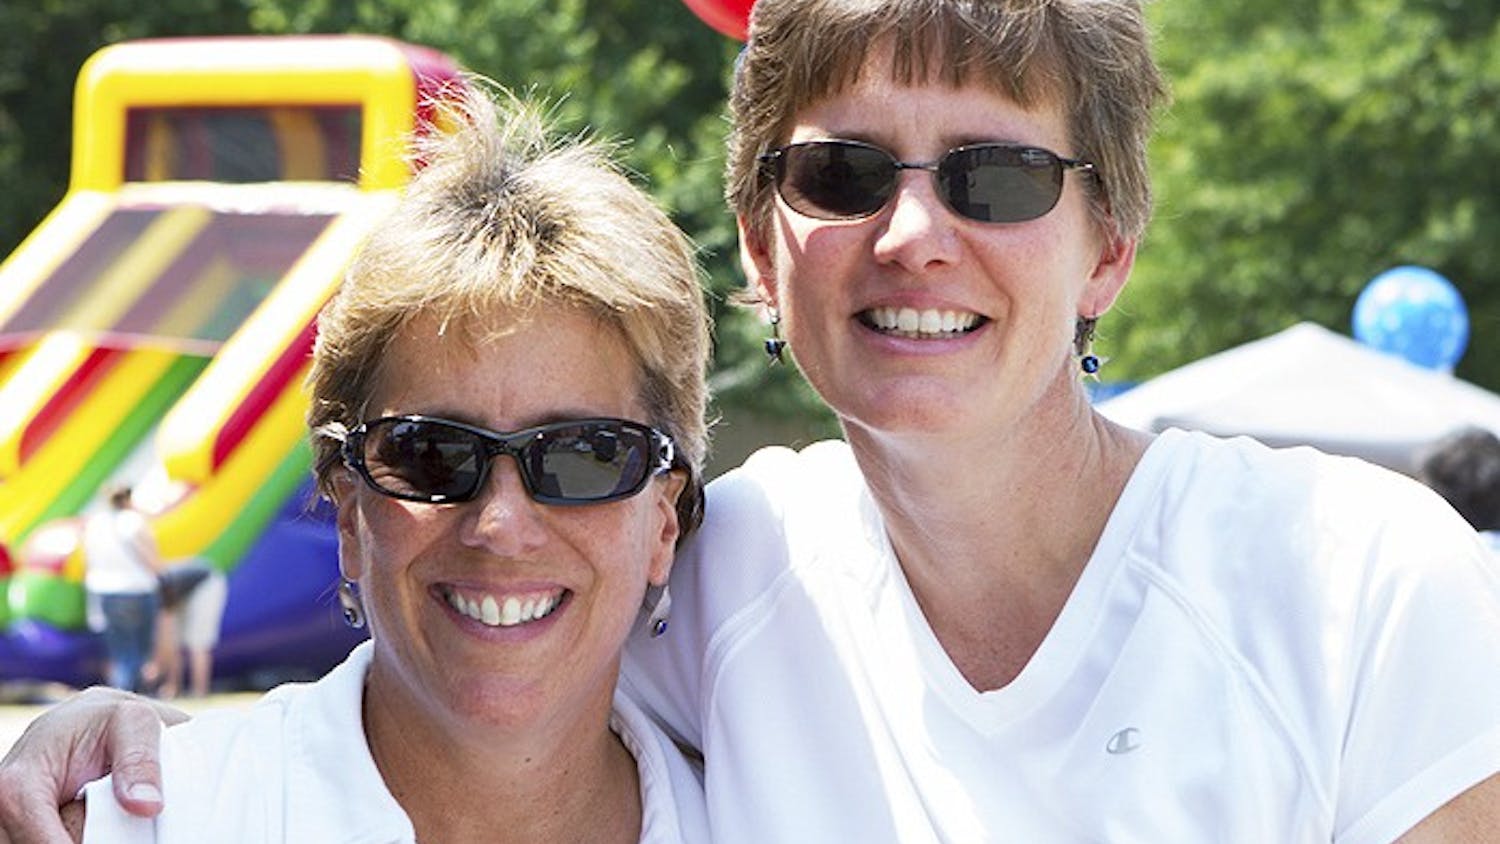 Alicia Stemper, right, and Lydia Lavelle became domestic partners in 2011. Photo courtesy of Avery Stemper.